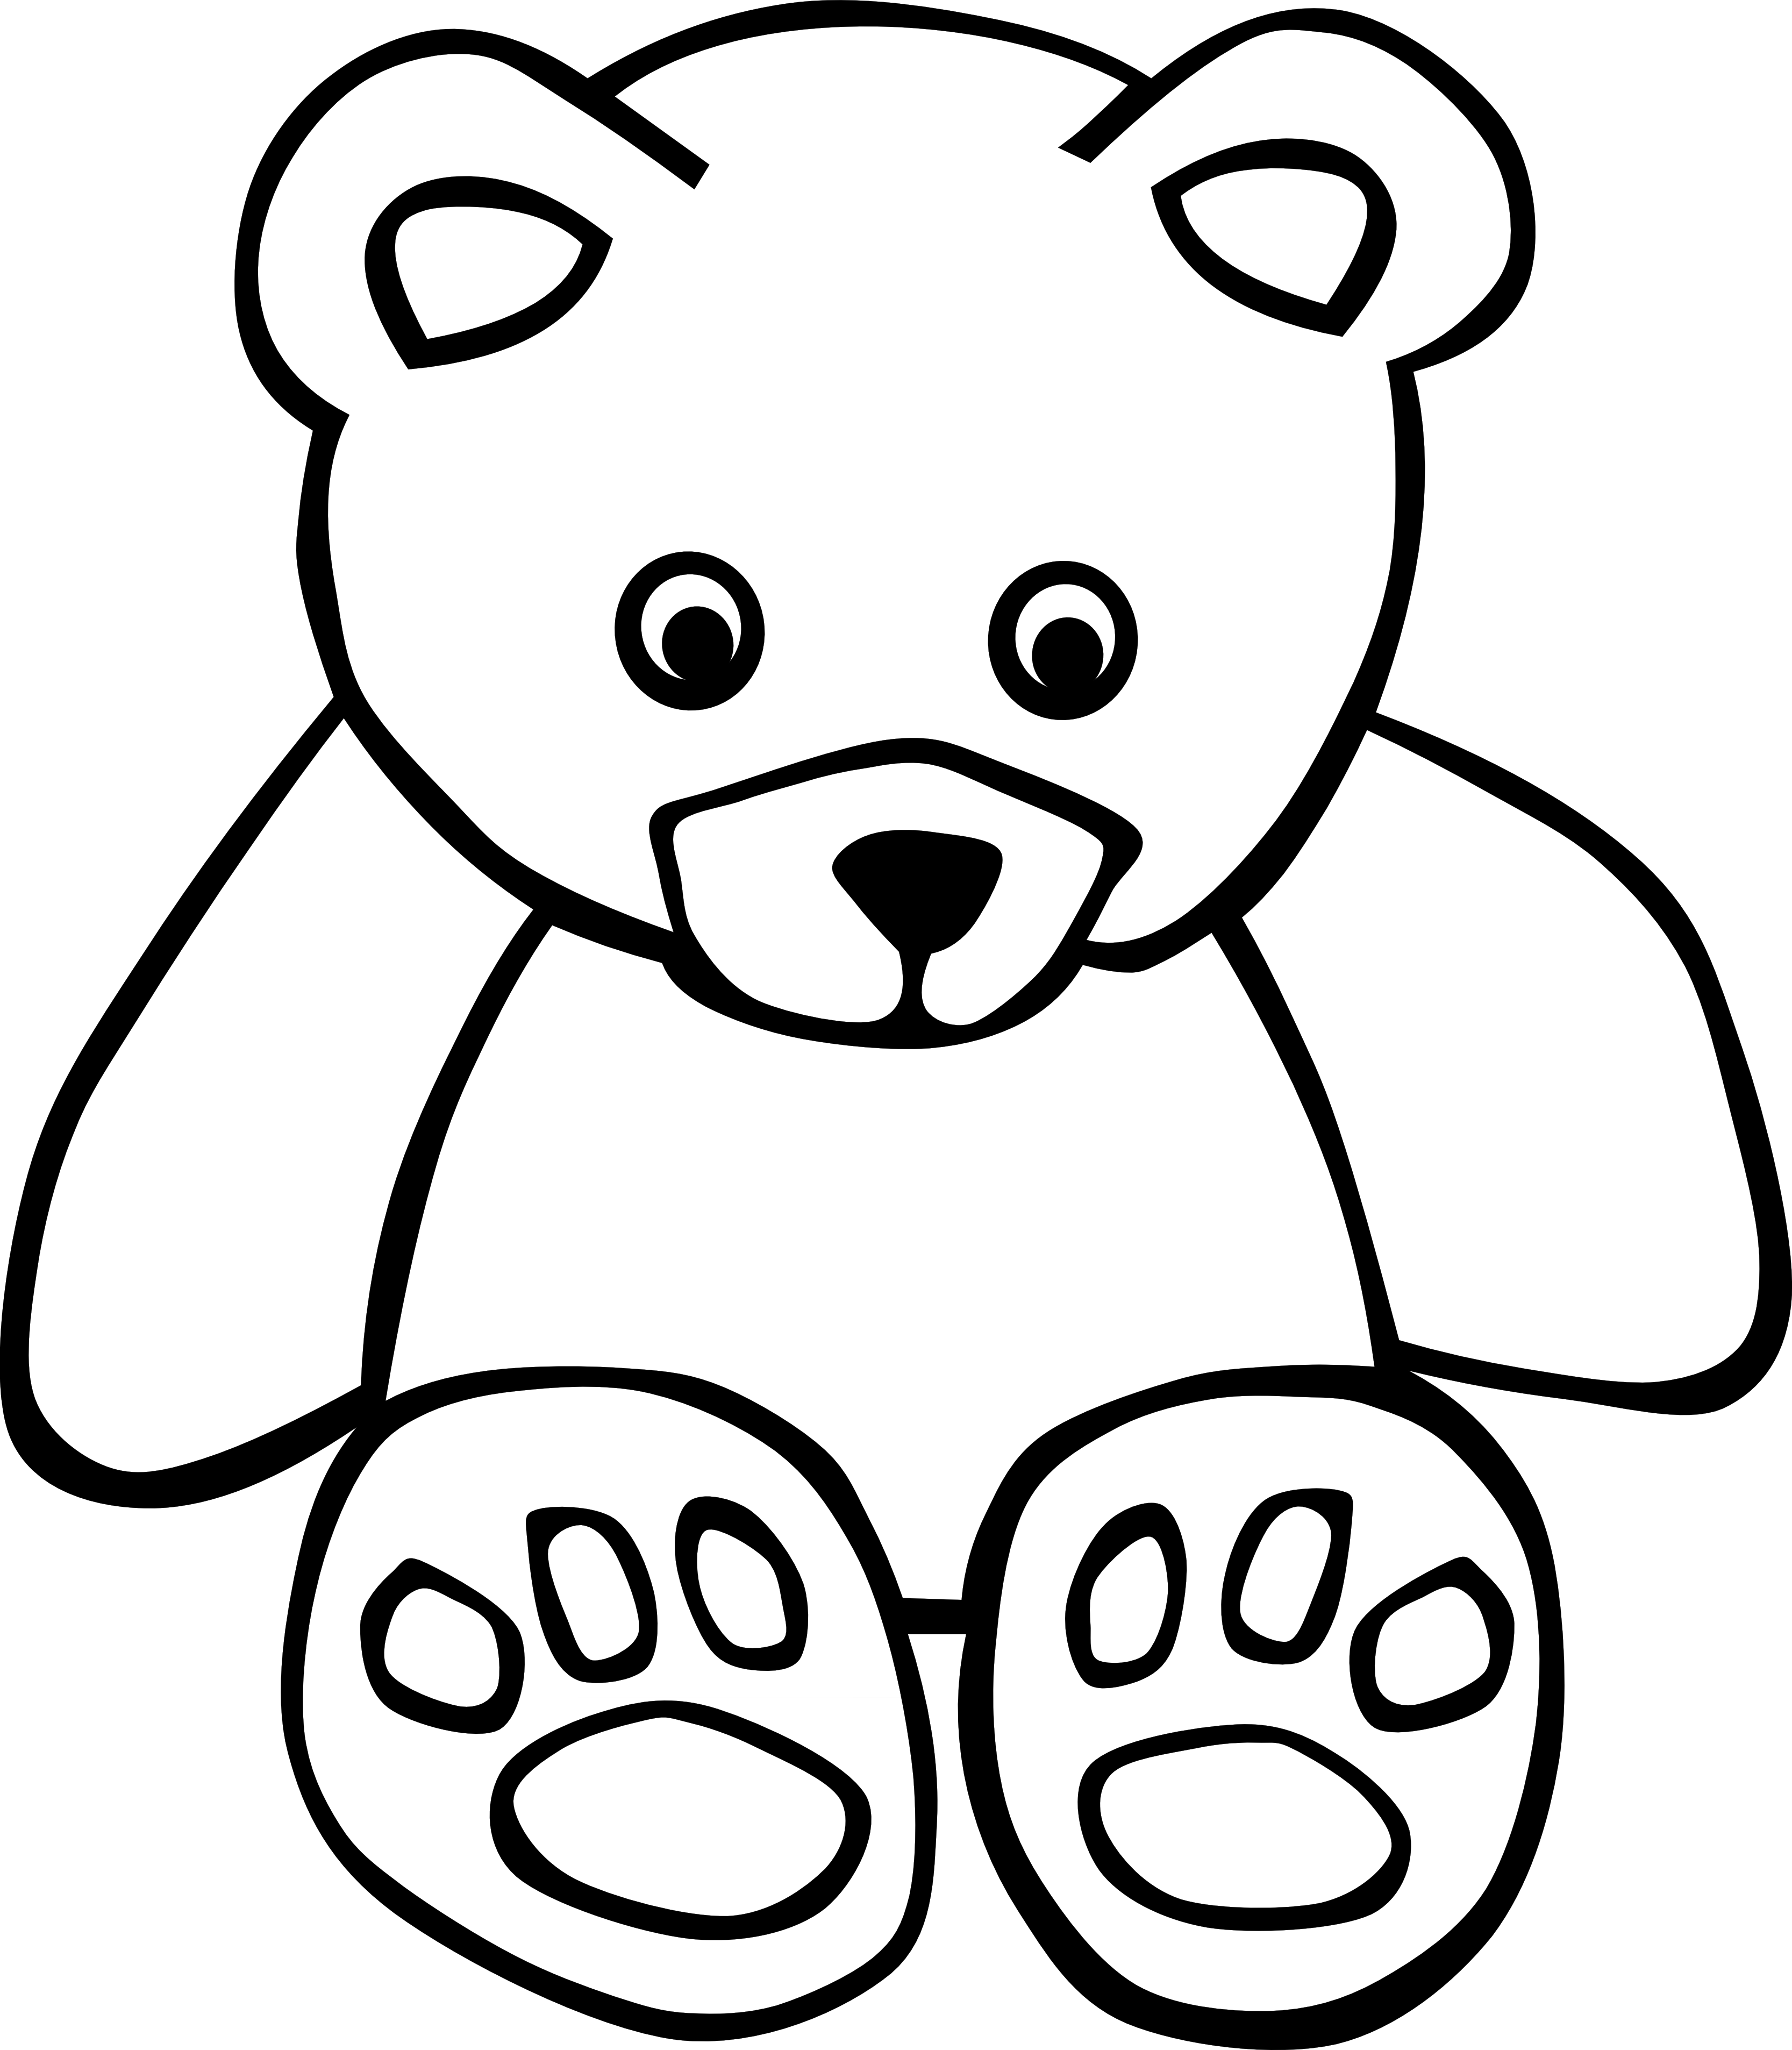 Black And White Clipart Bear - ClipArt Best